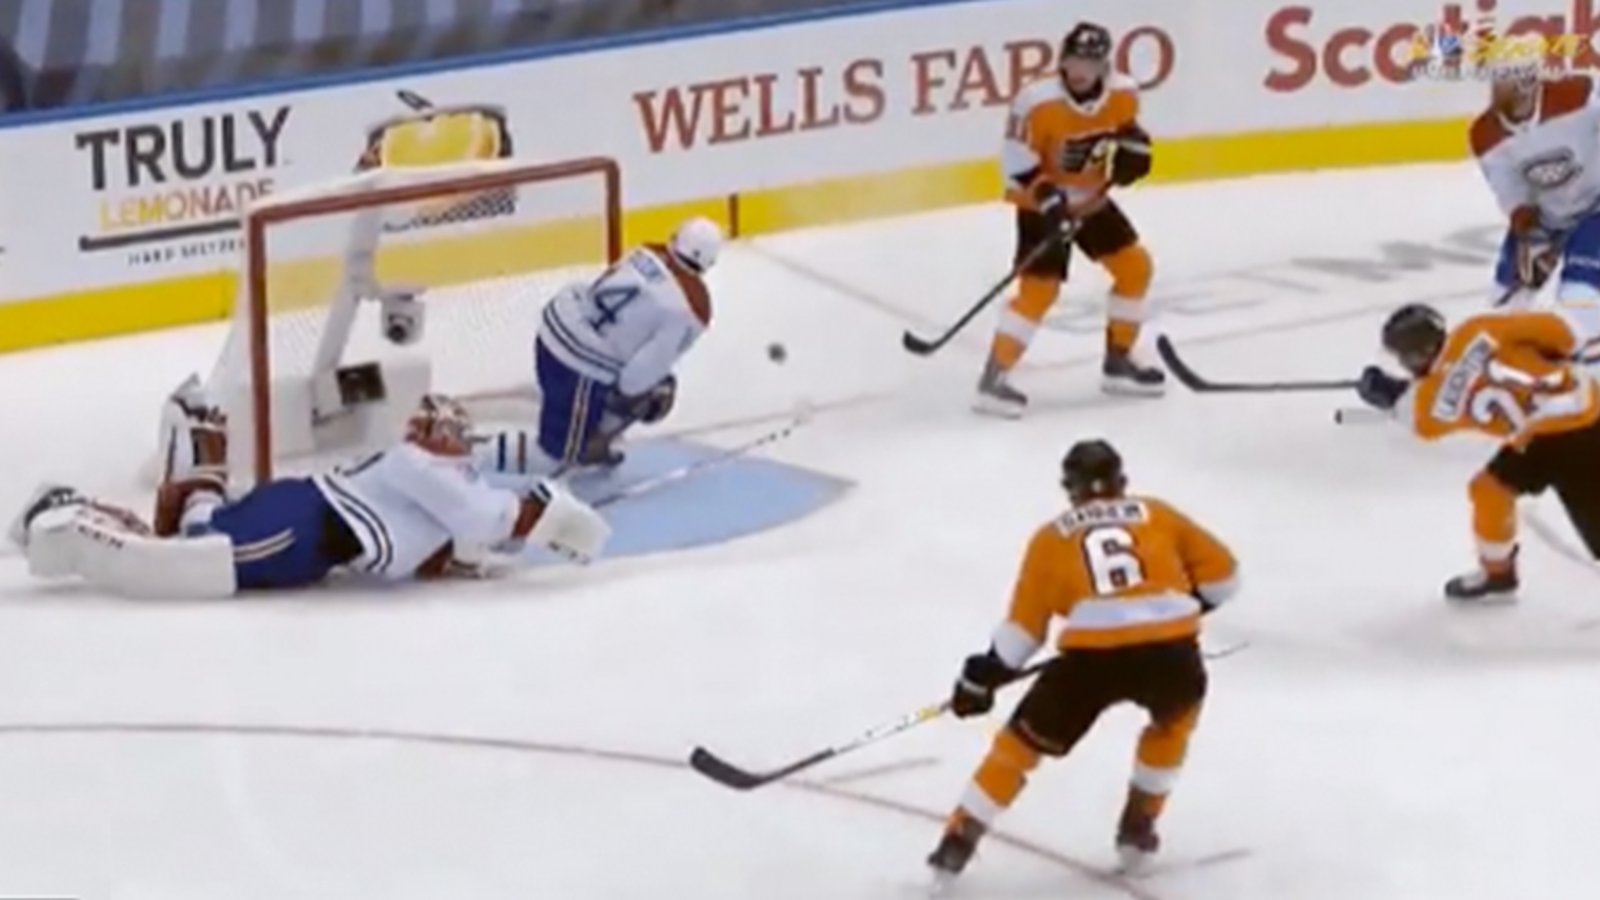 Down and out Price makes an insane diving stick save